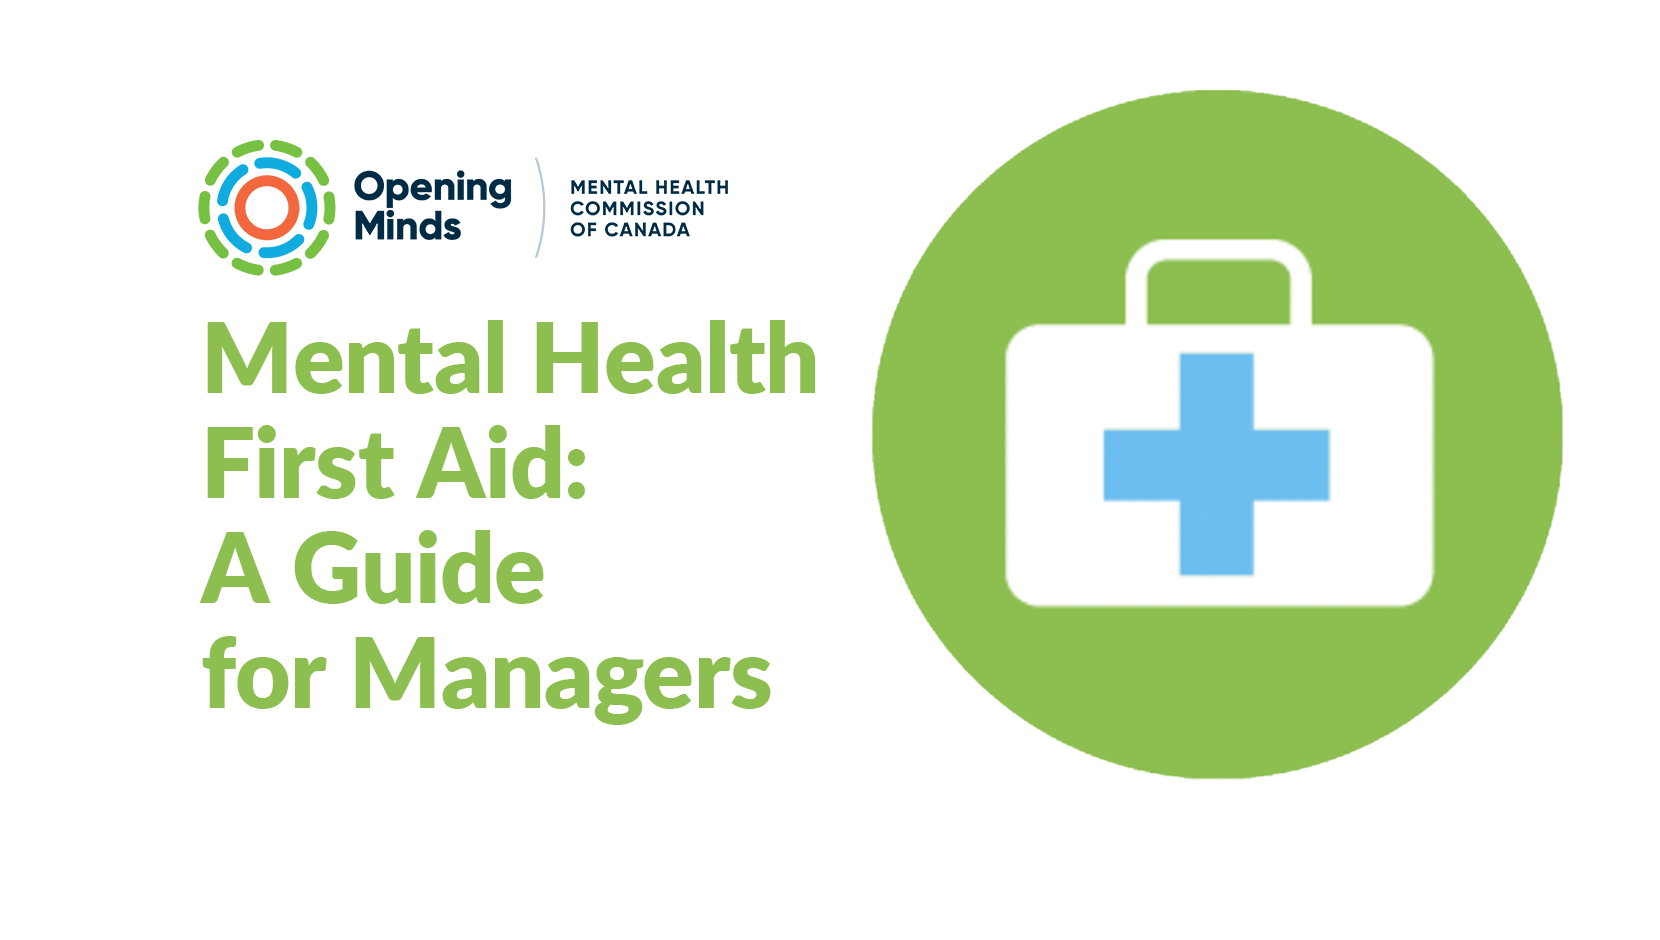 Green circle with a first aid kit in the centre. Text: Mental Health First Aid Guide for Managers.